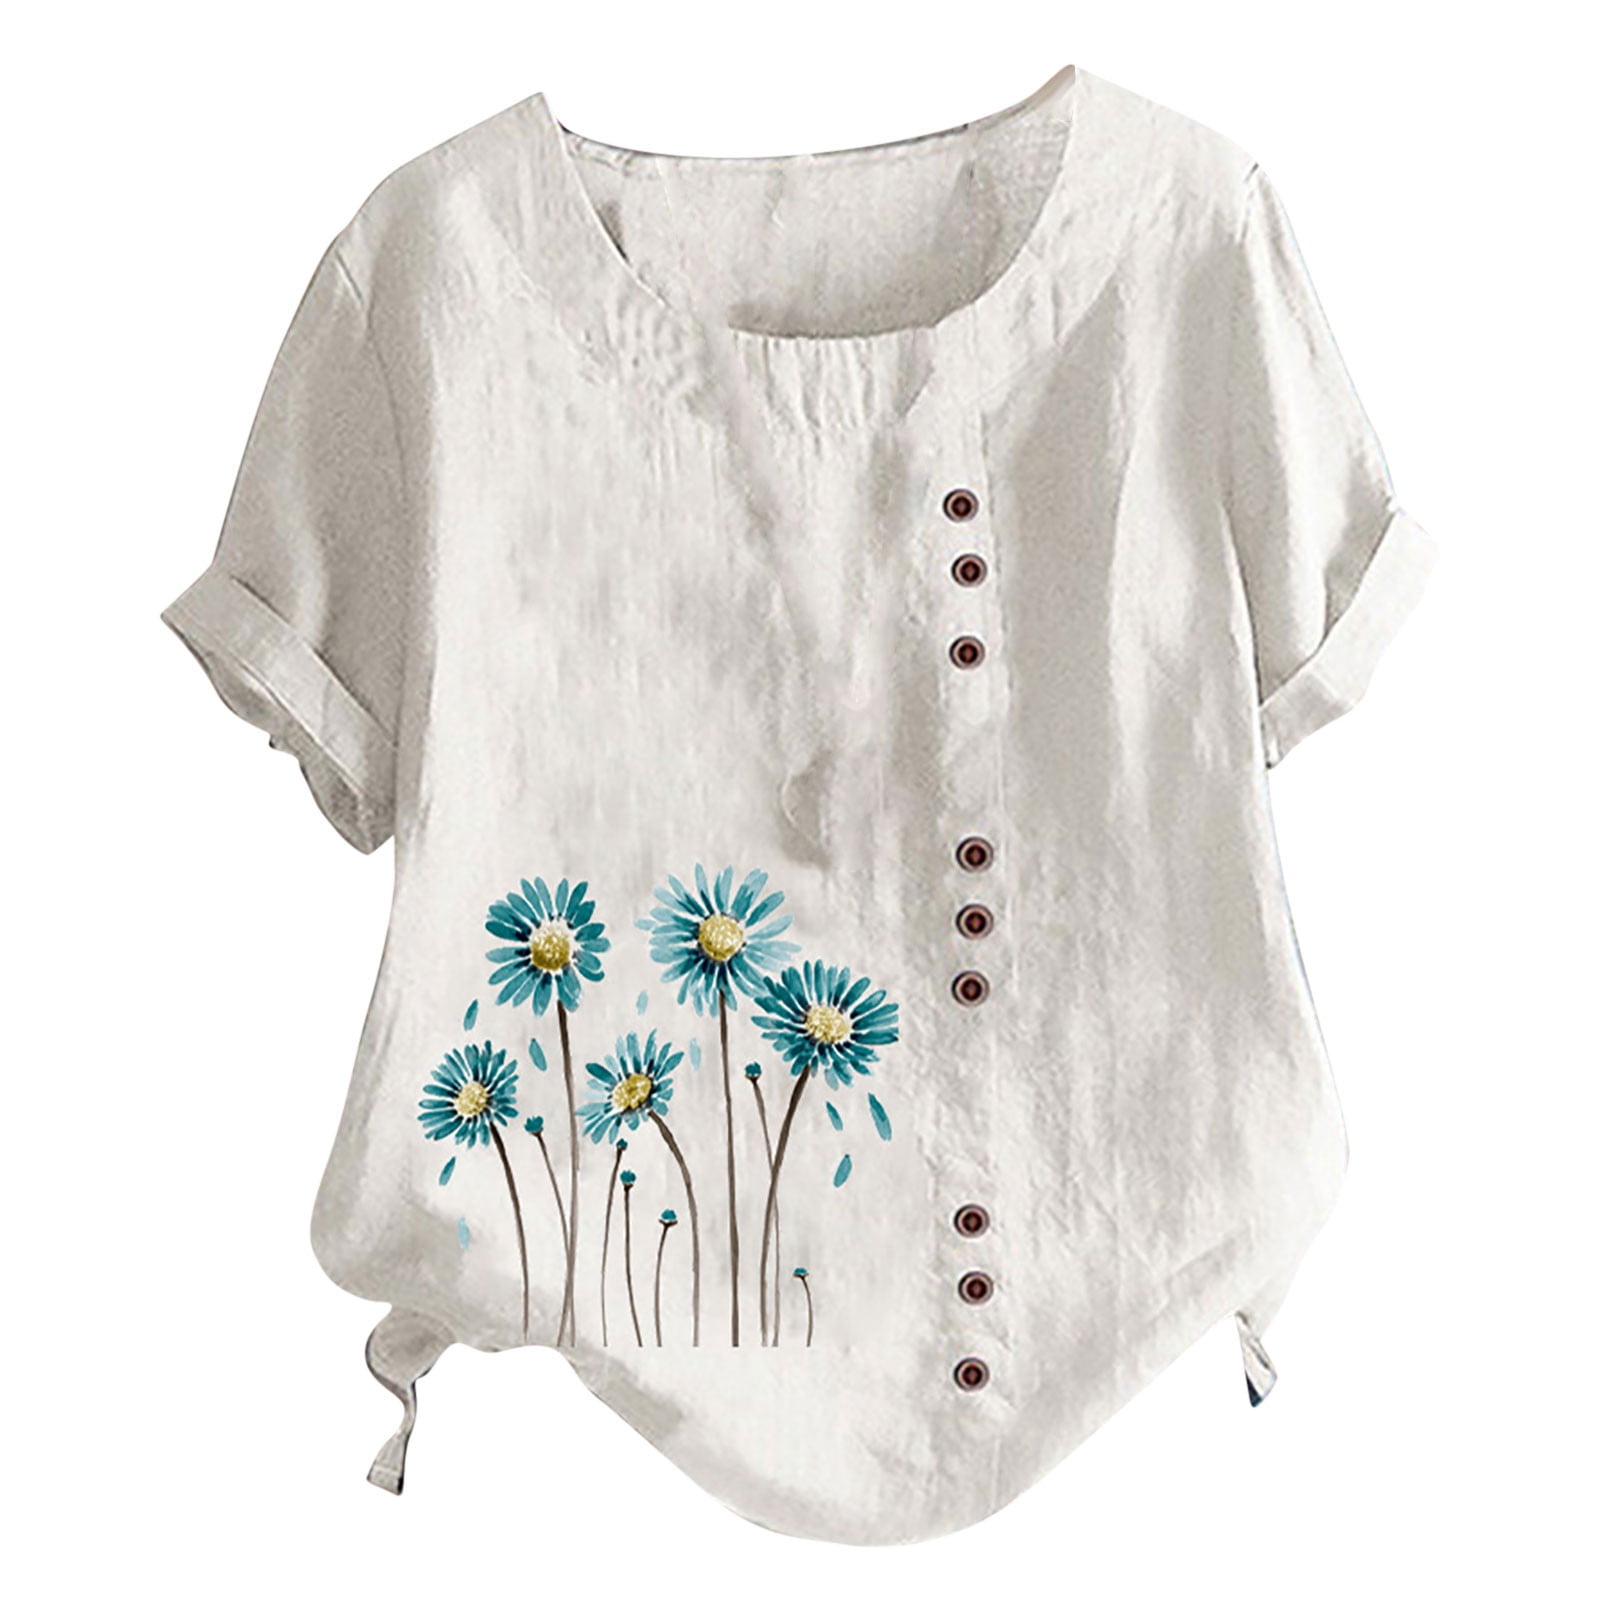 Eterna Tunic White Shirt Women Chiffon Flower Embroidery Blouse V Neck Office Ladies Tops Casual High Quality Puff Sleeve XL